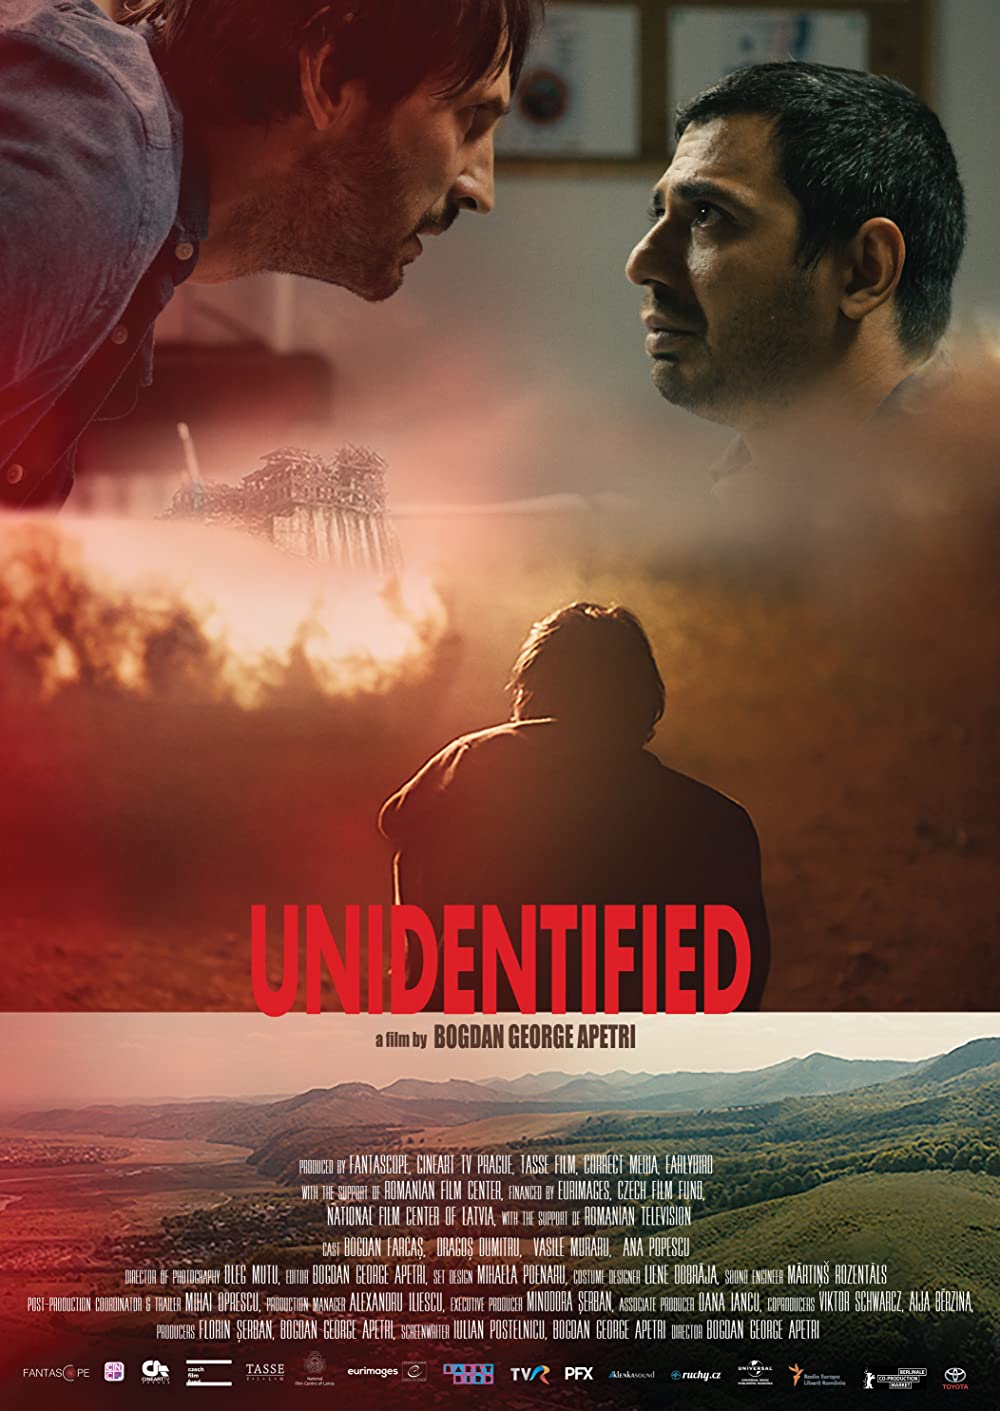 Unidentified Movie 2022, Official Trailer, Release Date, HD Poster